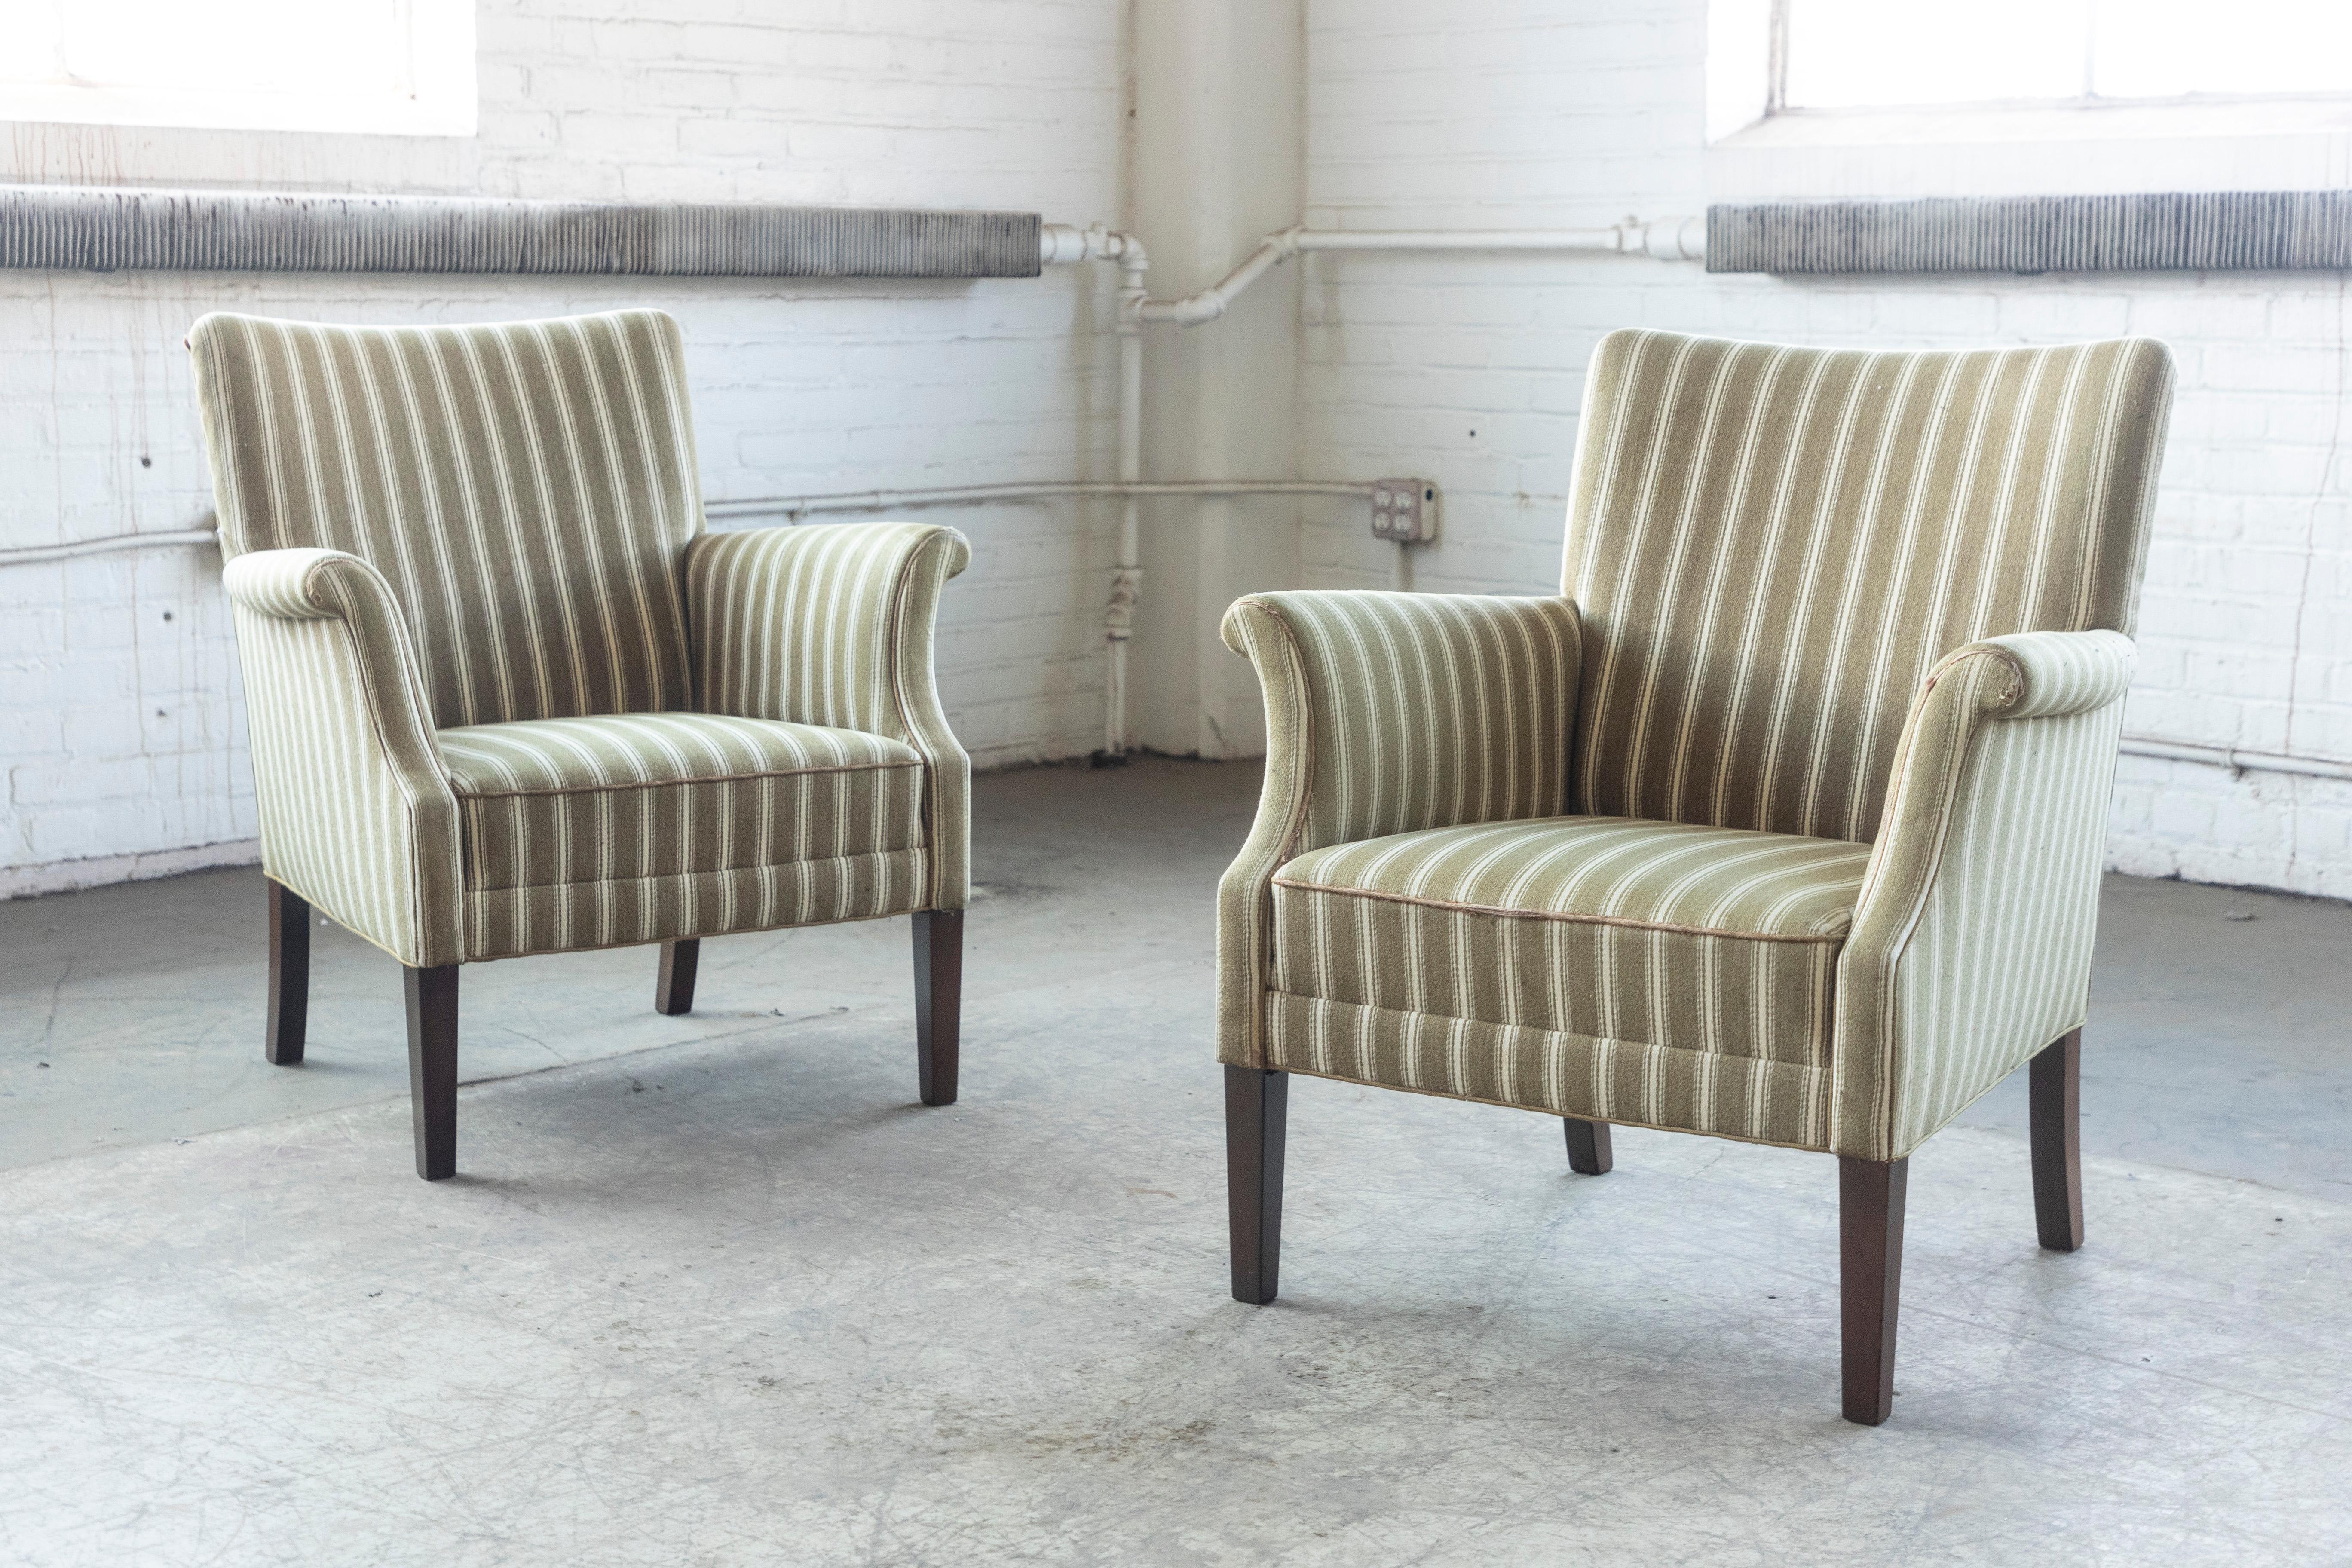 Beautiful pair of 1950s Danish easy chair attributed to Fritz Hansen. Very elegant with their distinct shape, precise lines and harmonious proportions. Very versatile size well suited for today's urban homes. The chairs have been reupholstered at a